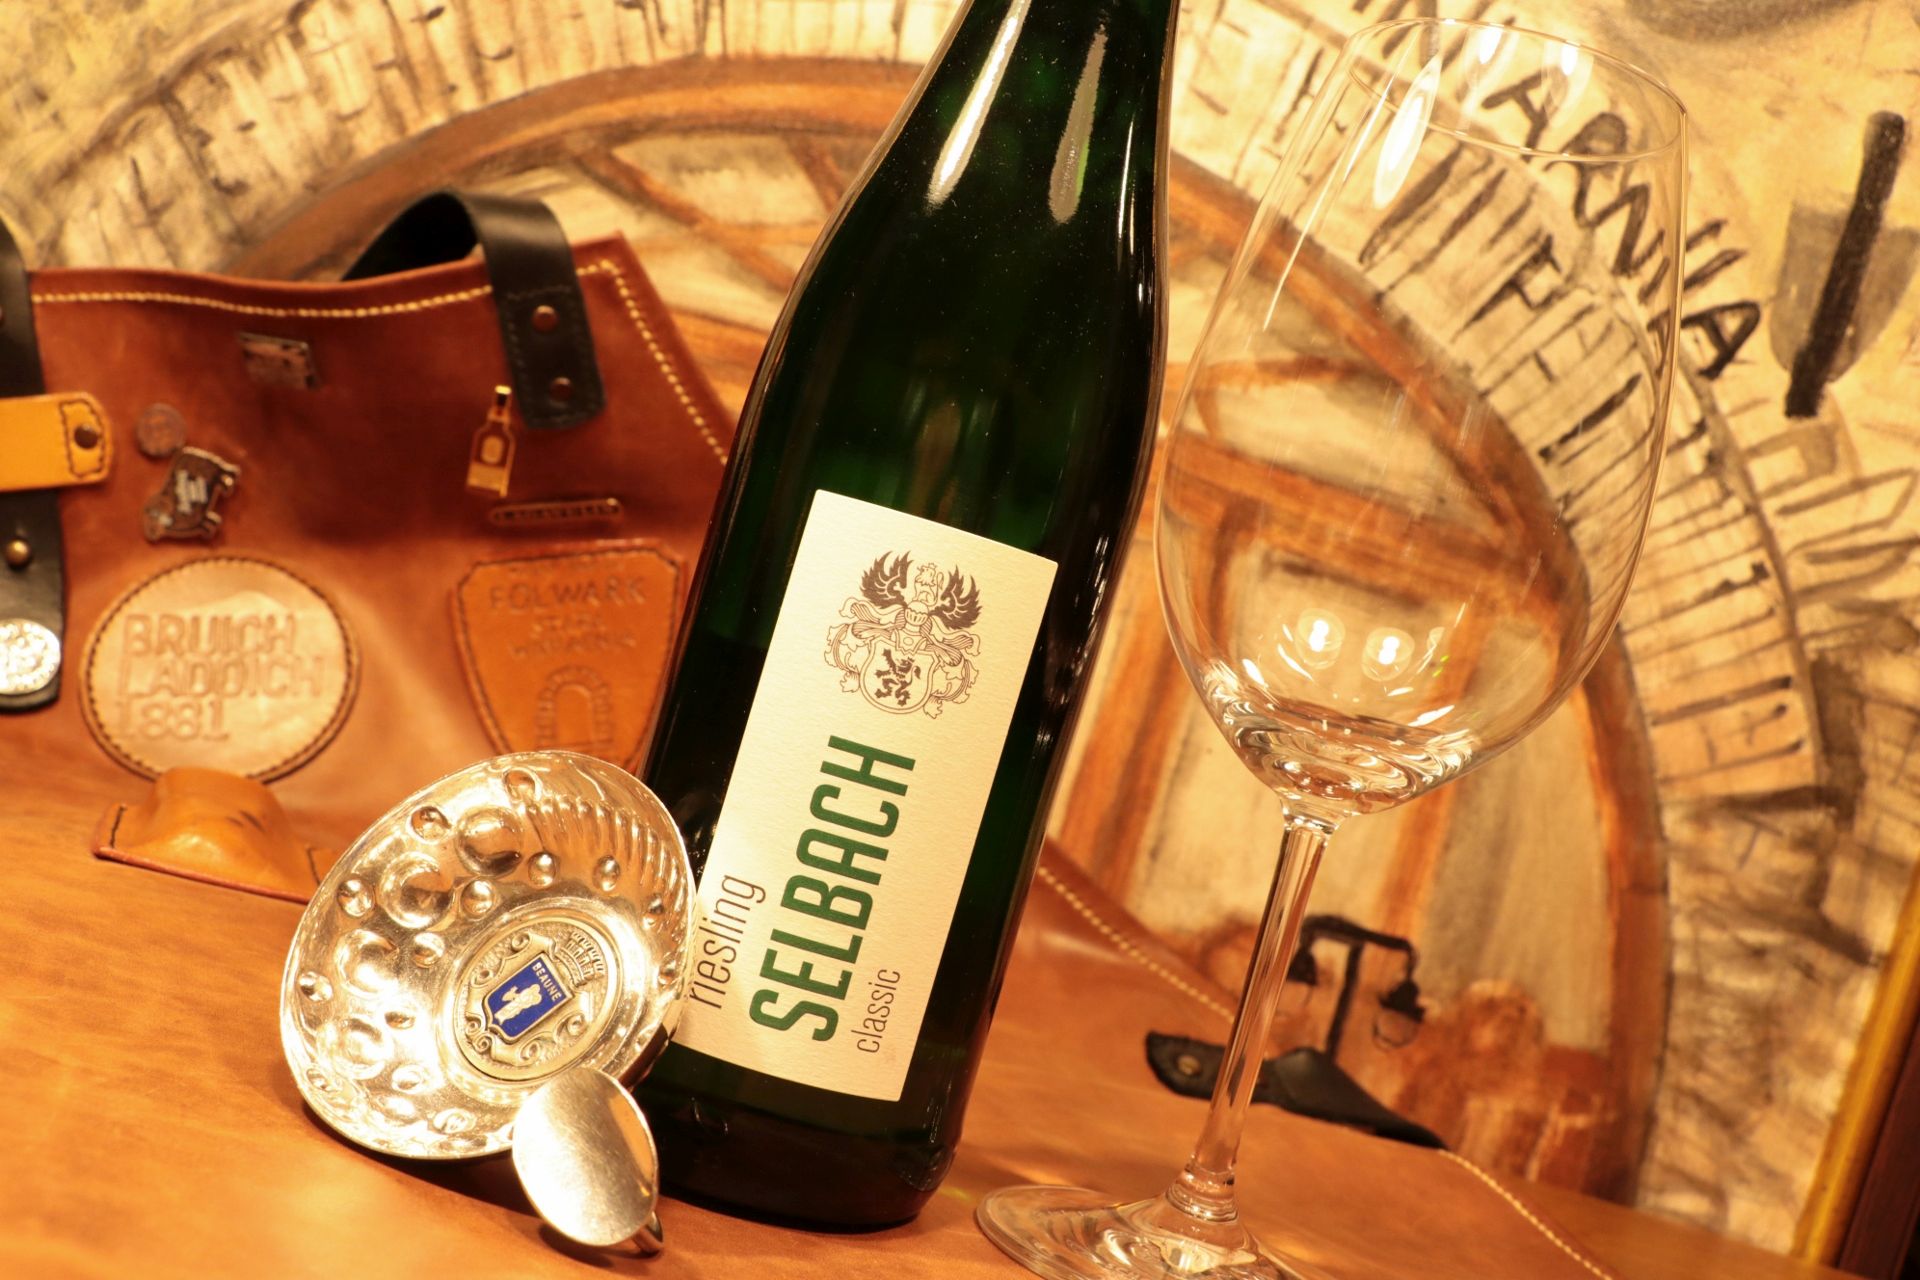 Selbach Riesling Classic